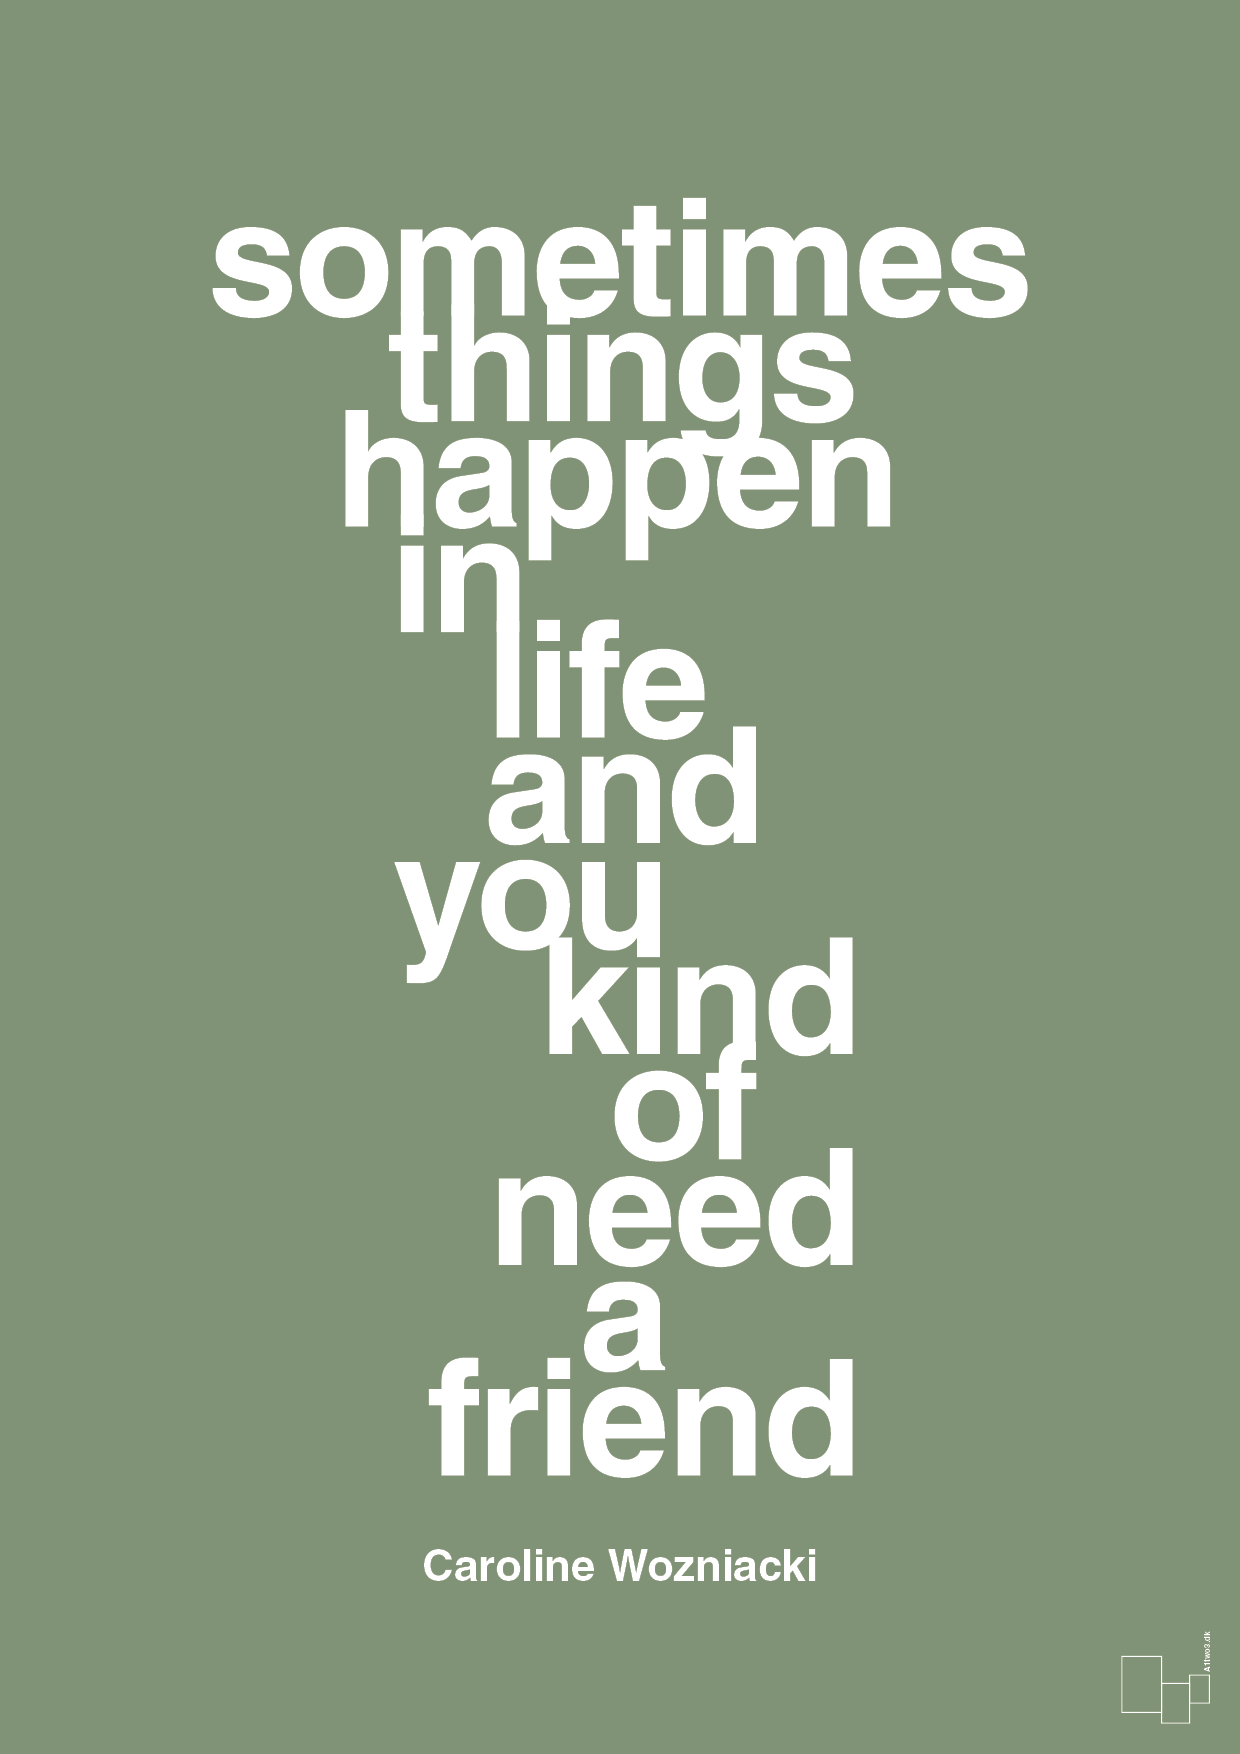 sometimes things happen in life and you kind of need a friend - Plakat med Citater i Jade